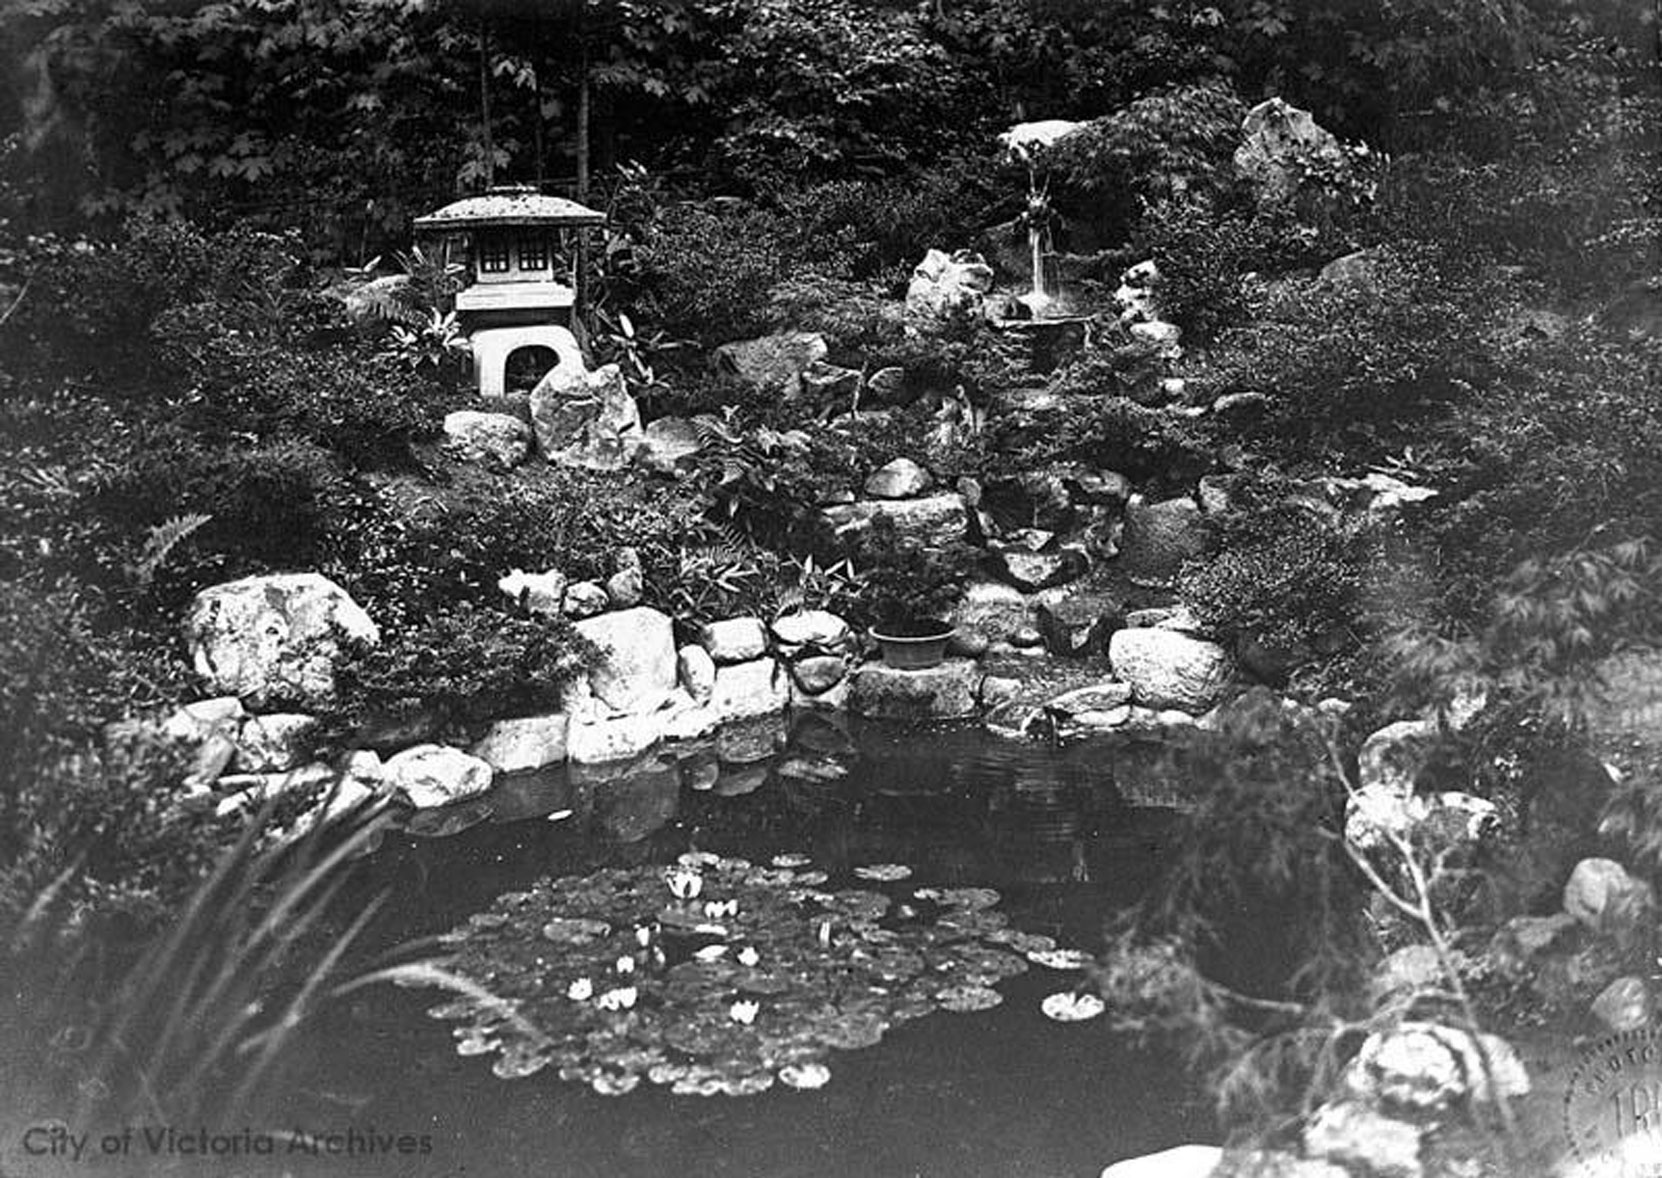 The Japanese Tea Houseat Gorge Park, 1912 (City of Victoria Archives photo M07754)